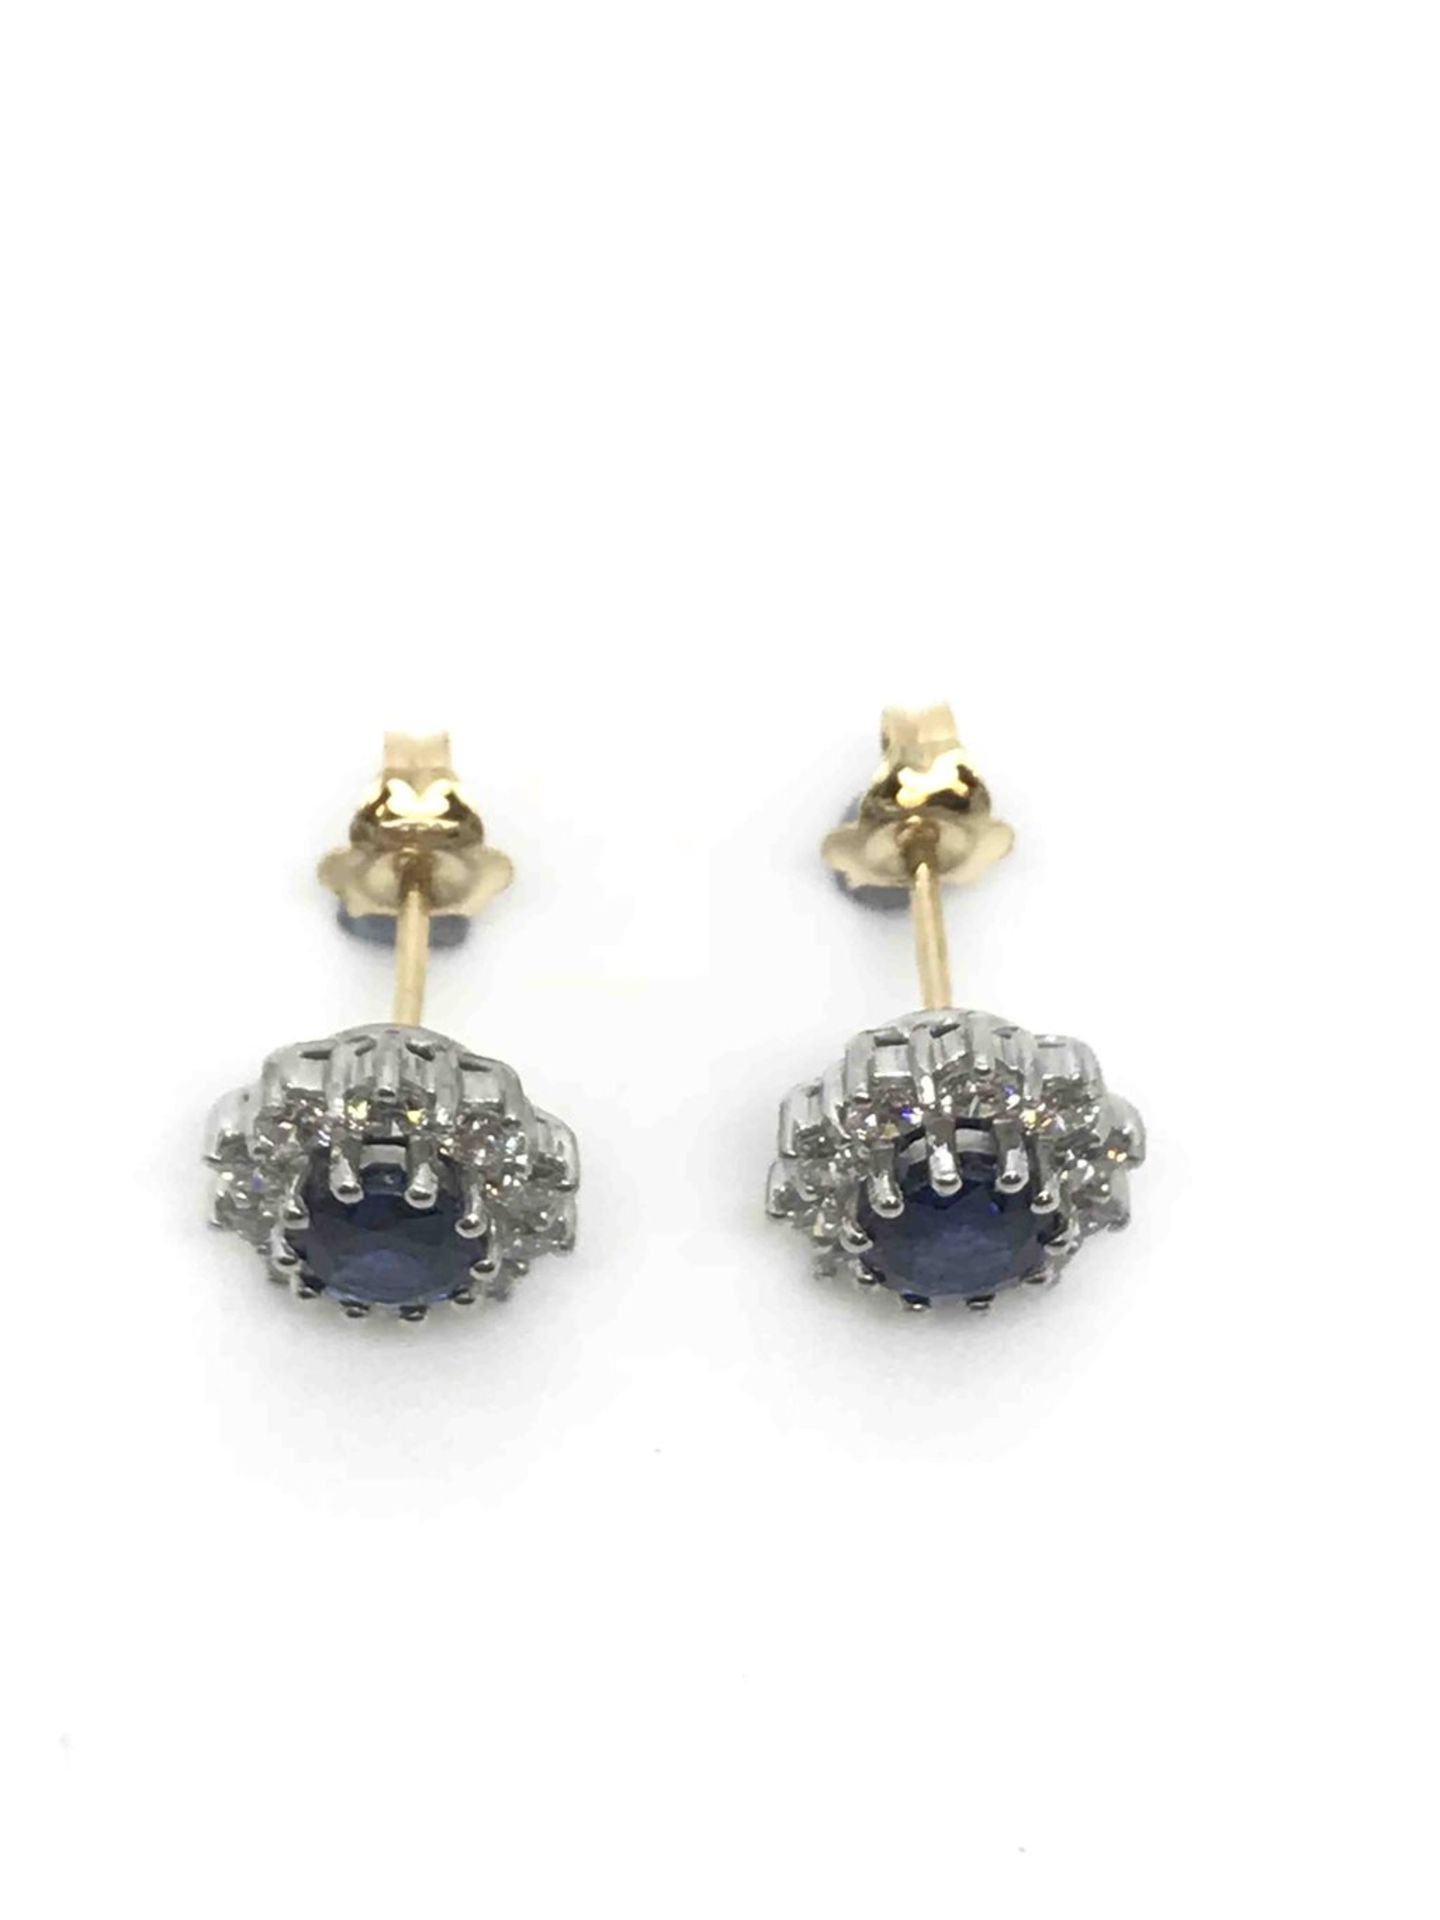 Sapphire & Diamond Cluster Earrings, 18ct Gold - Image 3 of 5